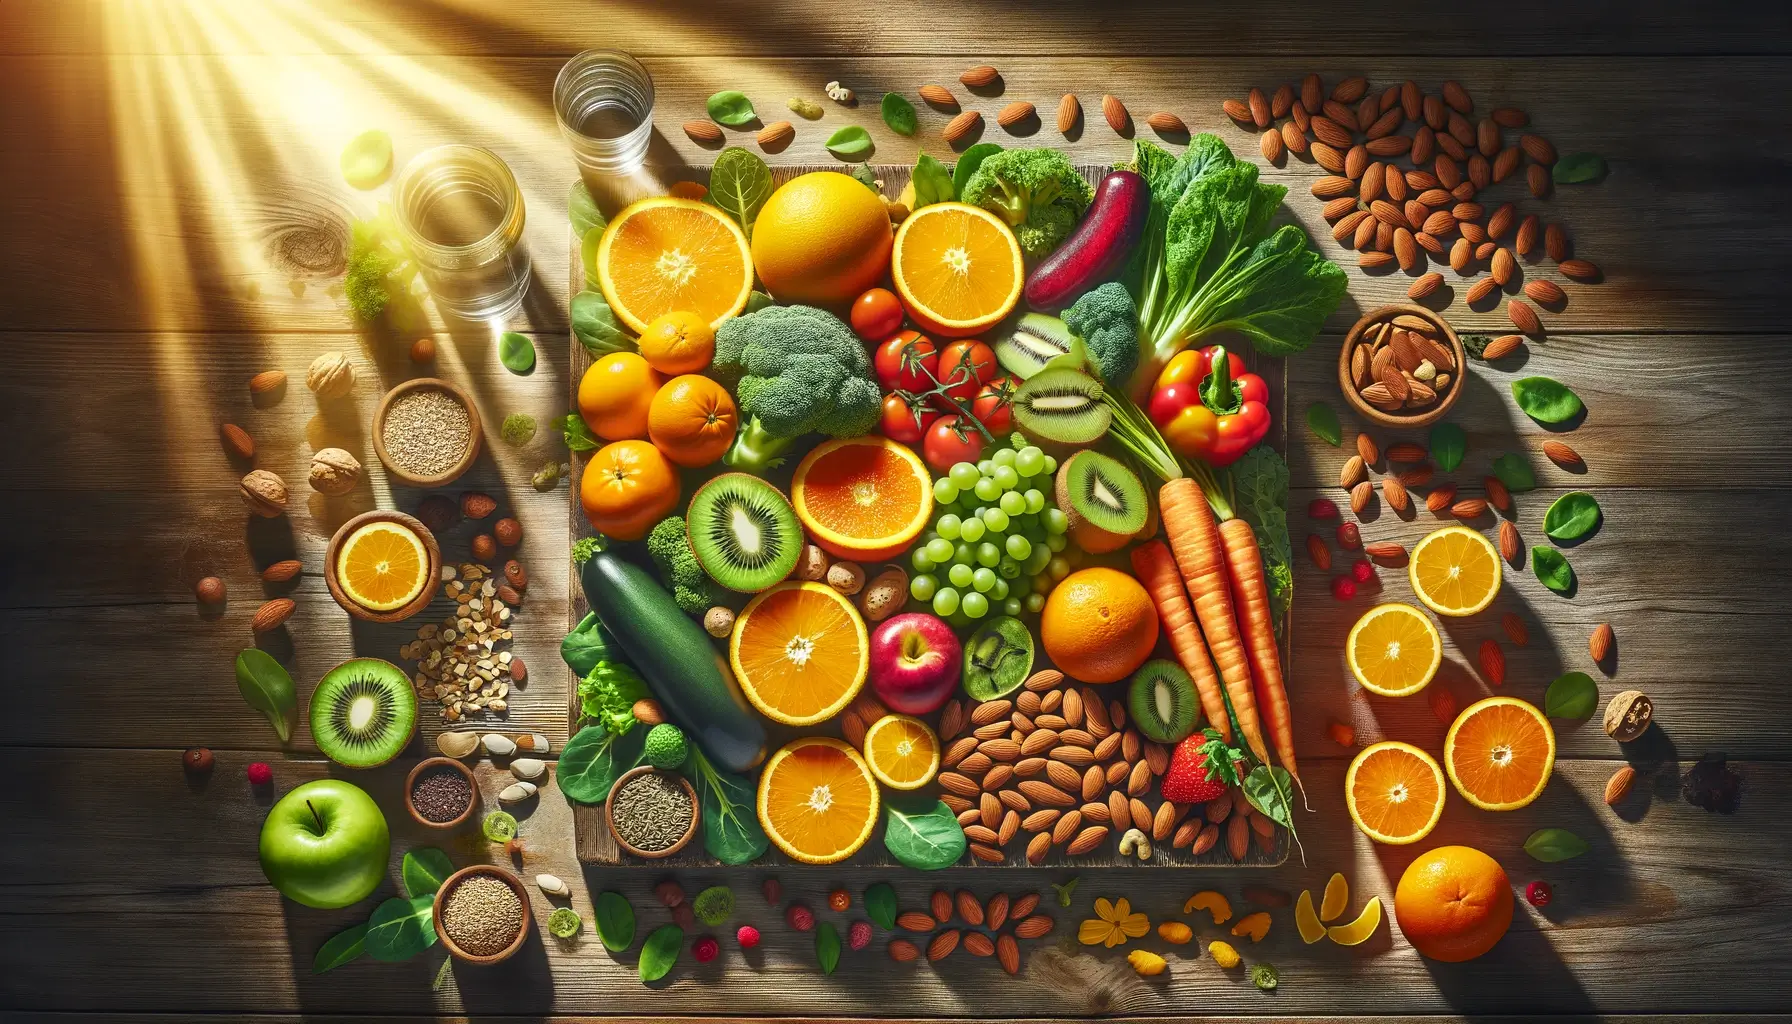 An array of fresh fruits, vegetables, nuts, and seeds rich in vitamins for healthy skin and hair, illuminated by sunlight on a wooden table.